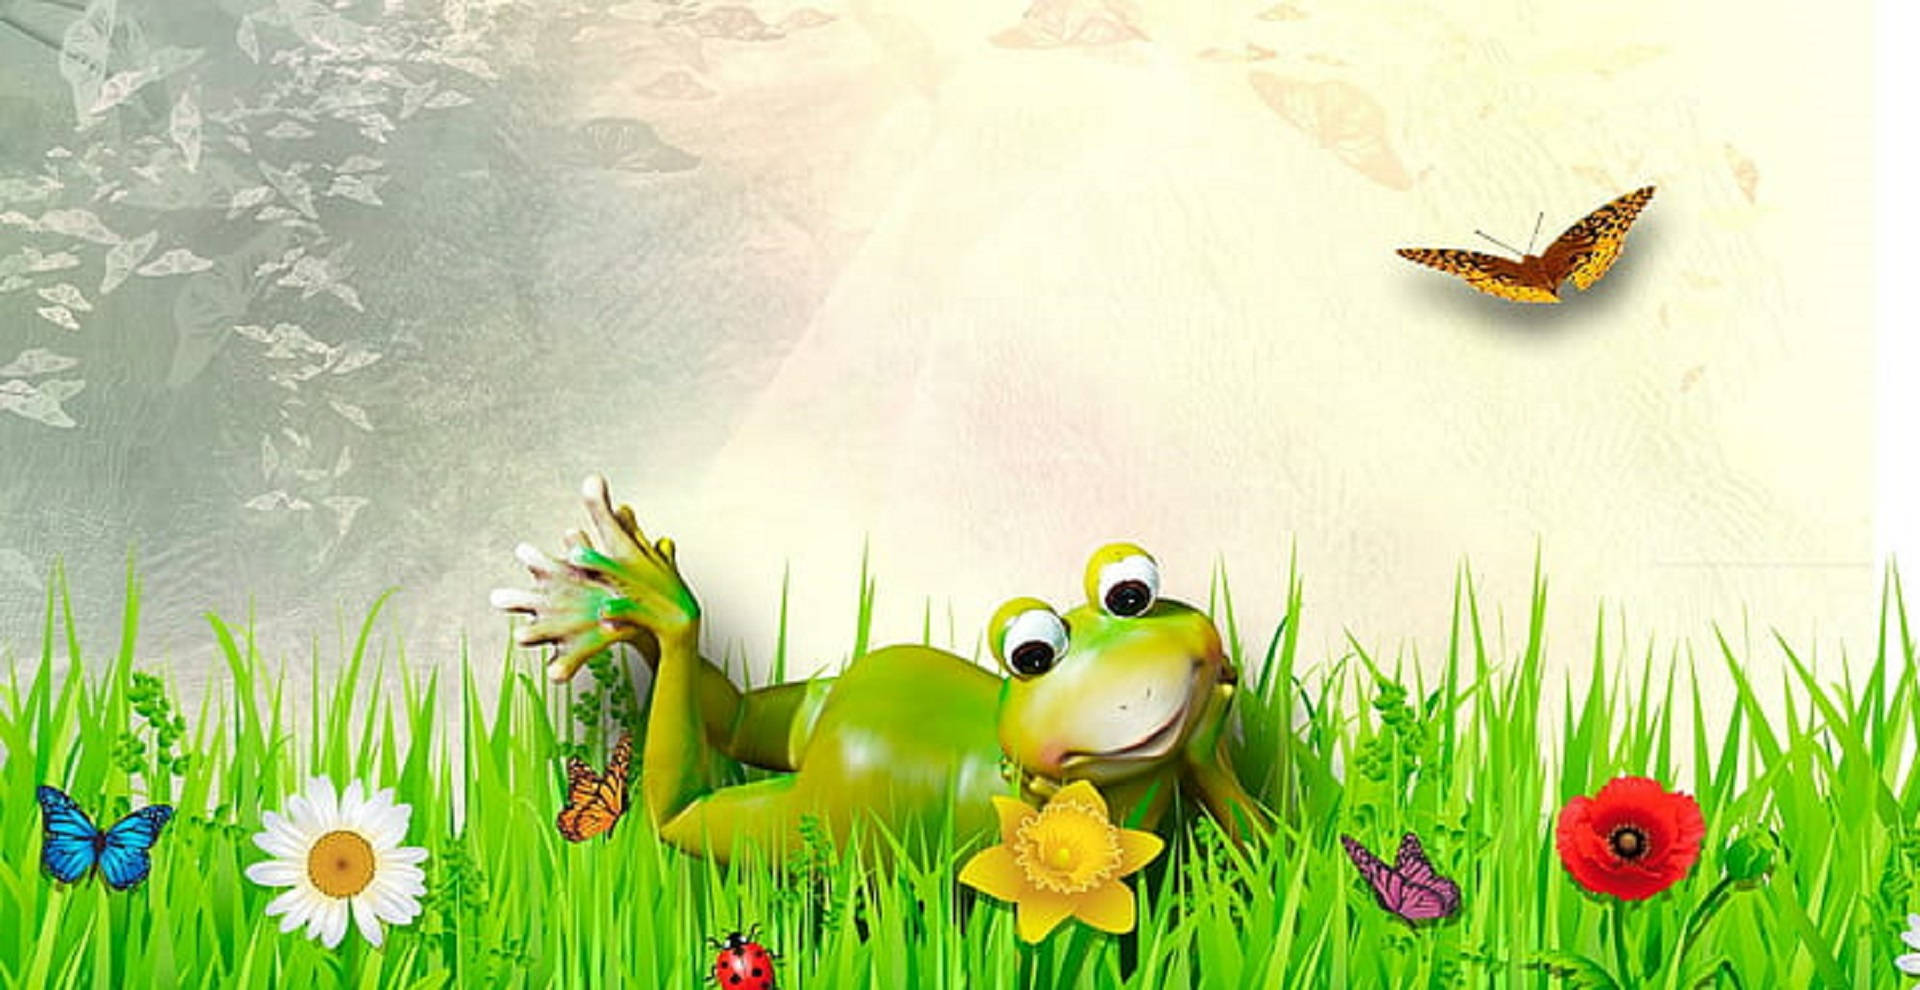 Whimsical Frog In Grass Background